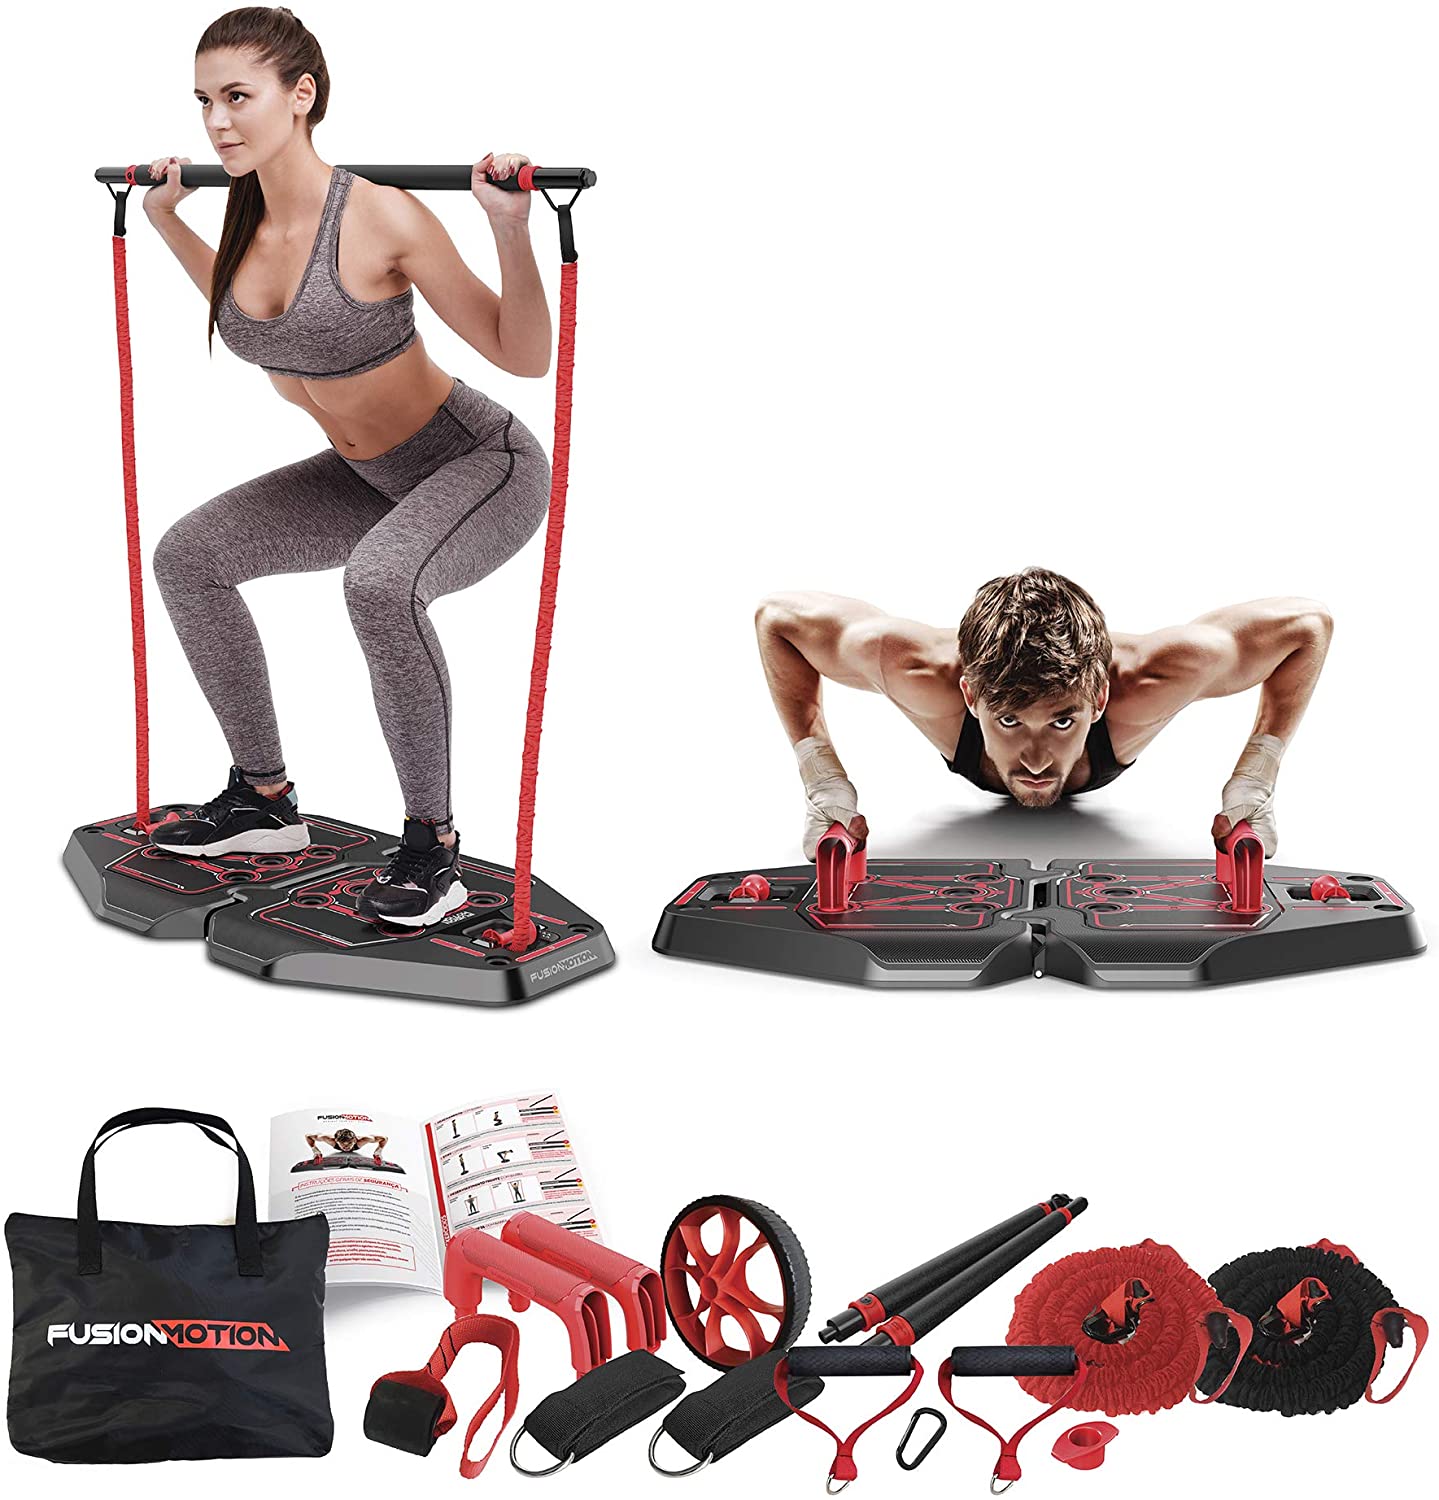 Fusion Motion Portable Gym with 8 Accessories Including Heavy Resistance Bands, Tricep Bar, Ab Roller Wheel, Pulleys and More - Full Body Workout Home Exercise Equipment to Build Muscle and Burn Fat